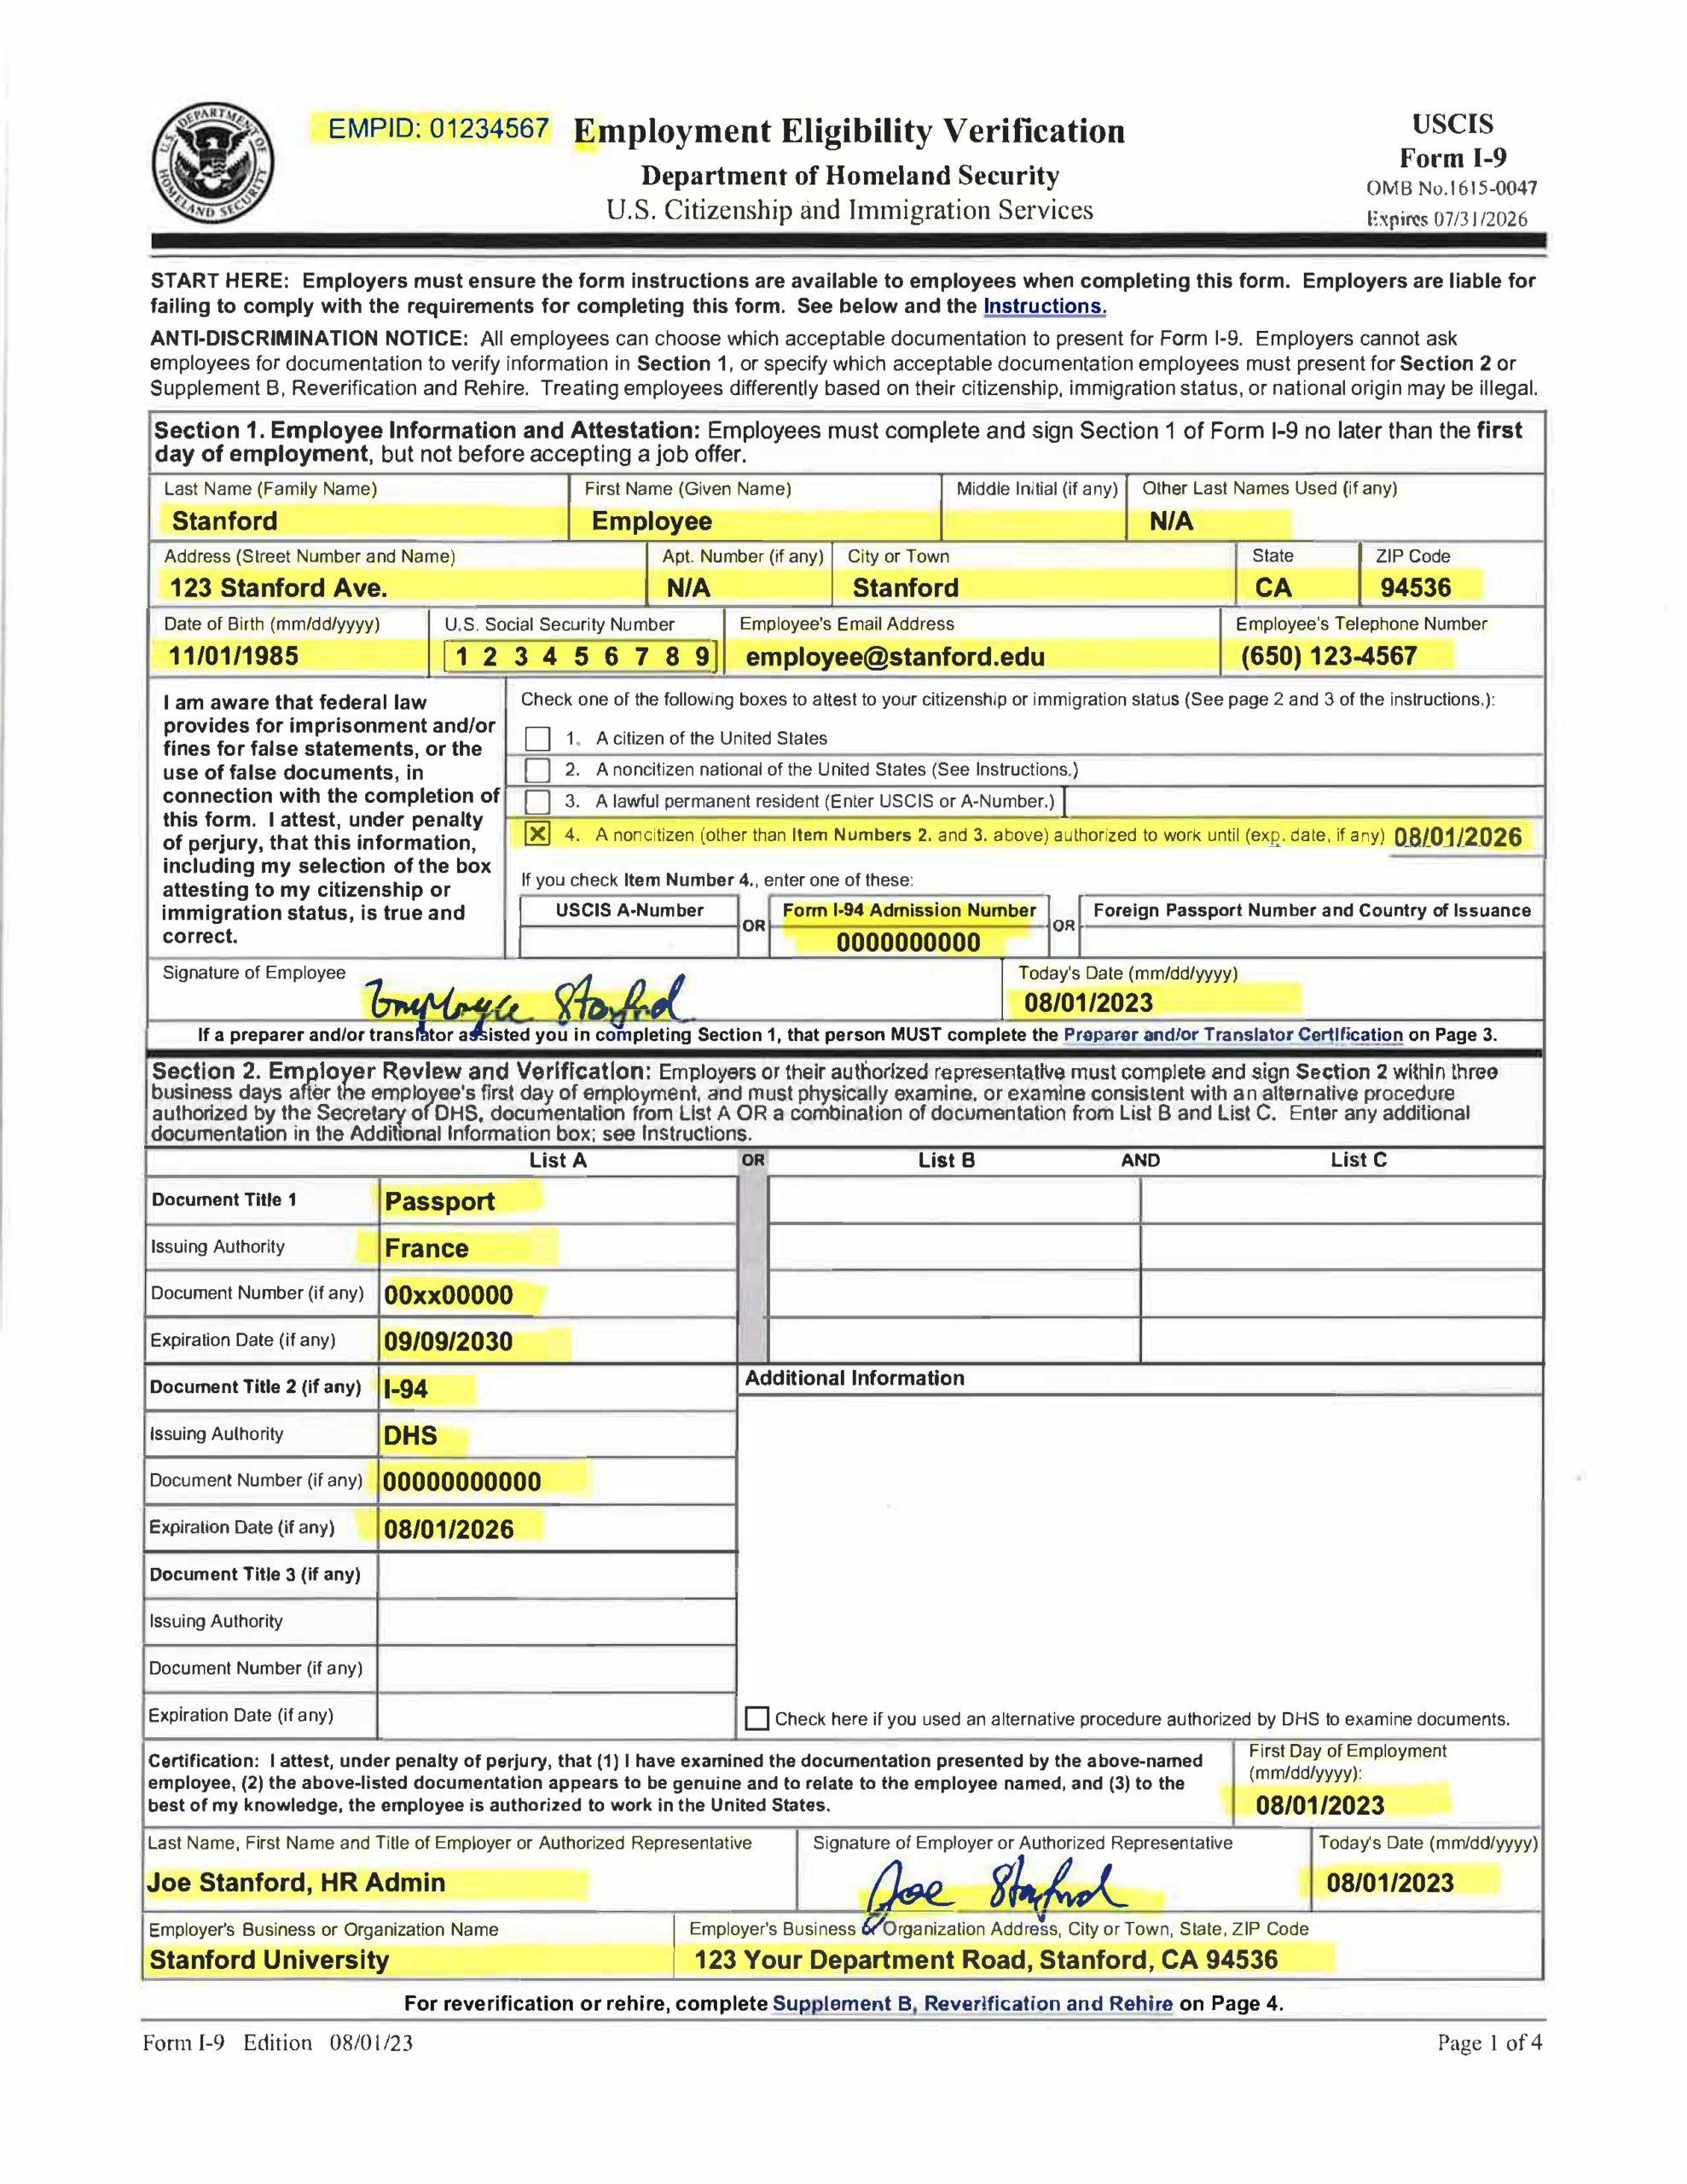 Examples Of Completed Form I-9 For Stanford throughout Form I-9 Pdf